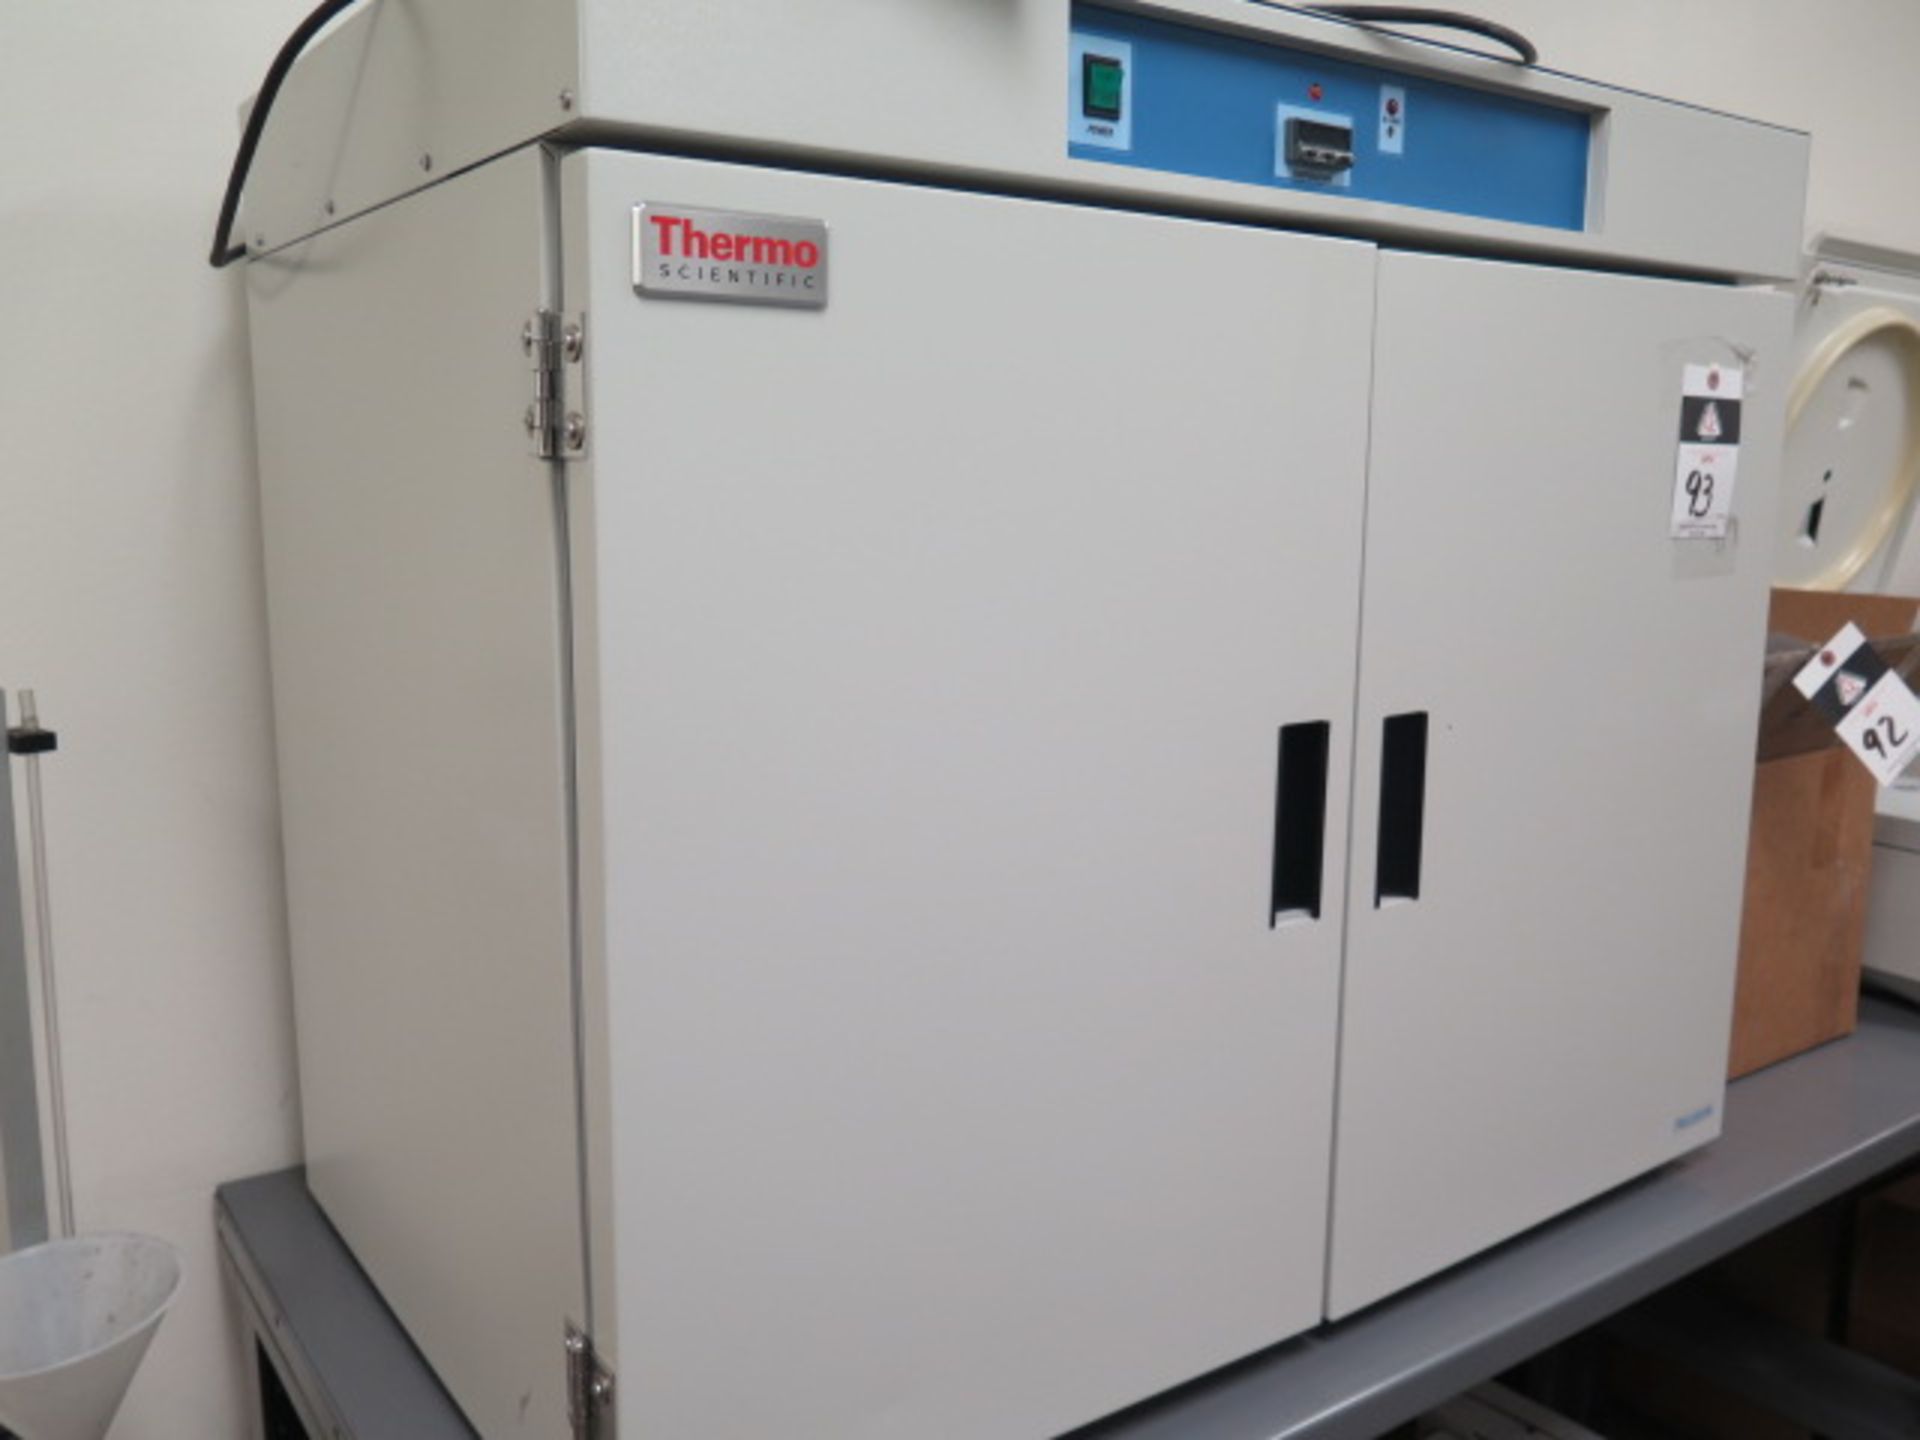 Thermo Scientifis mdl. 6878 Lab Oven s/n 612299-130 w/ Digital Temp Controller. SOLD AS IS - Image 2 of 5